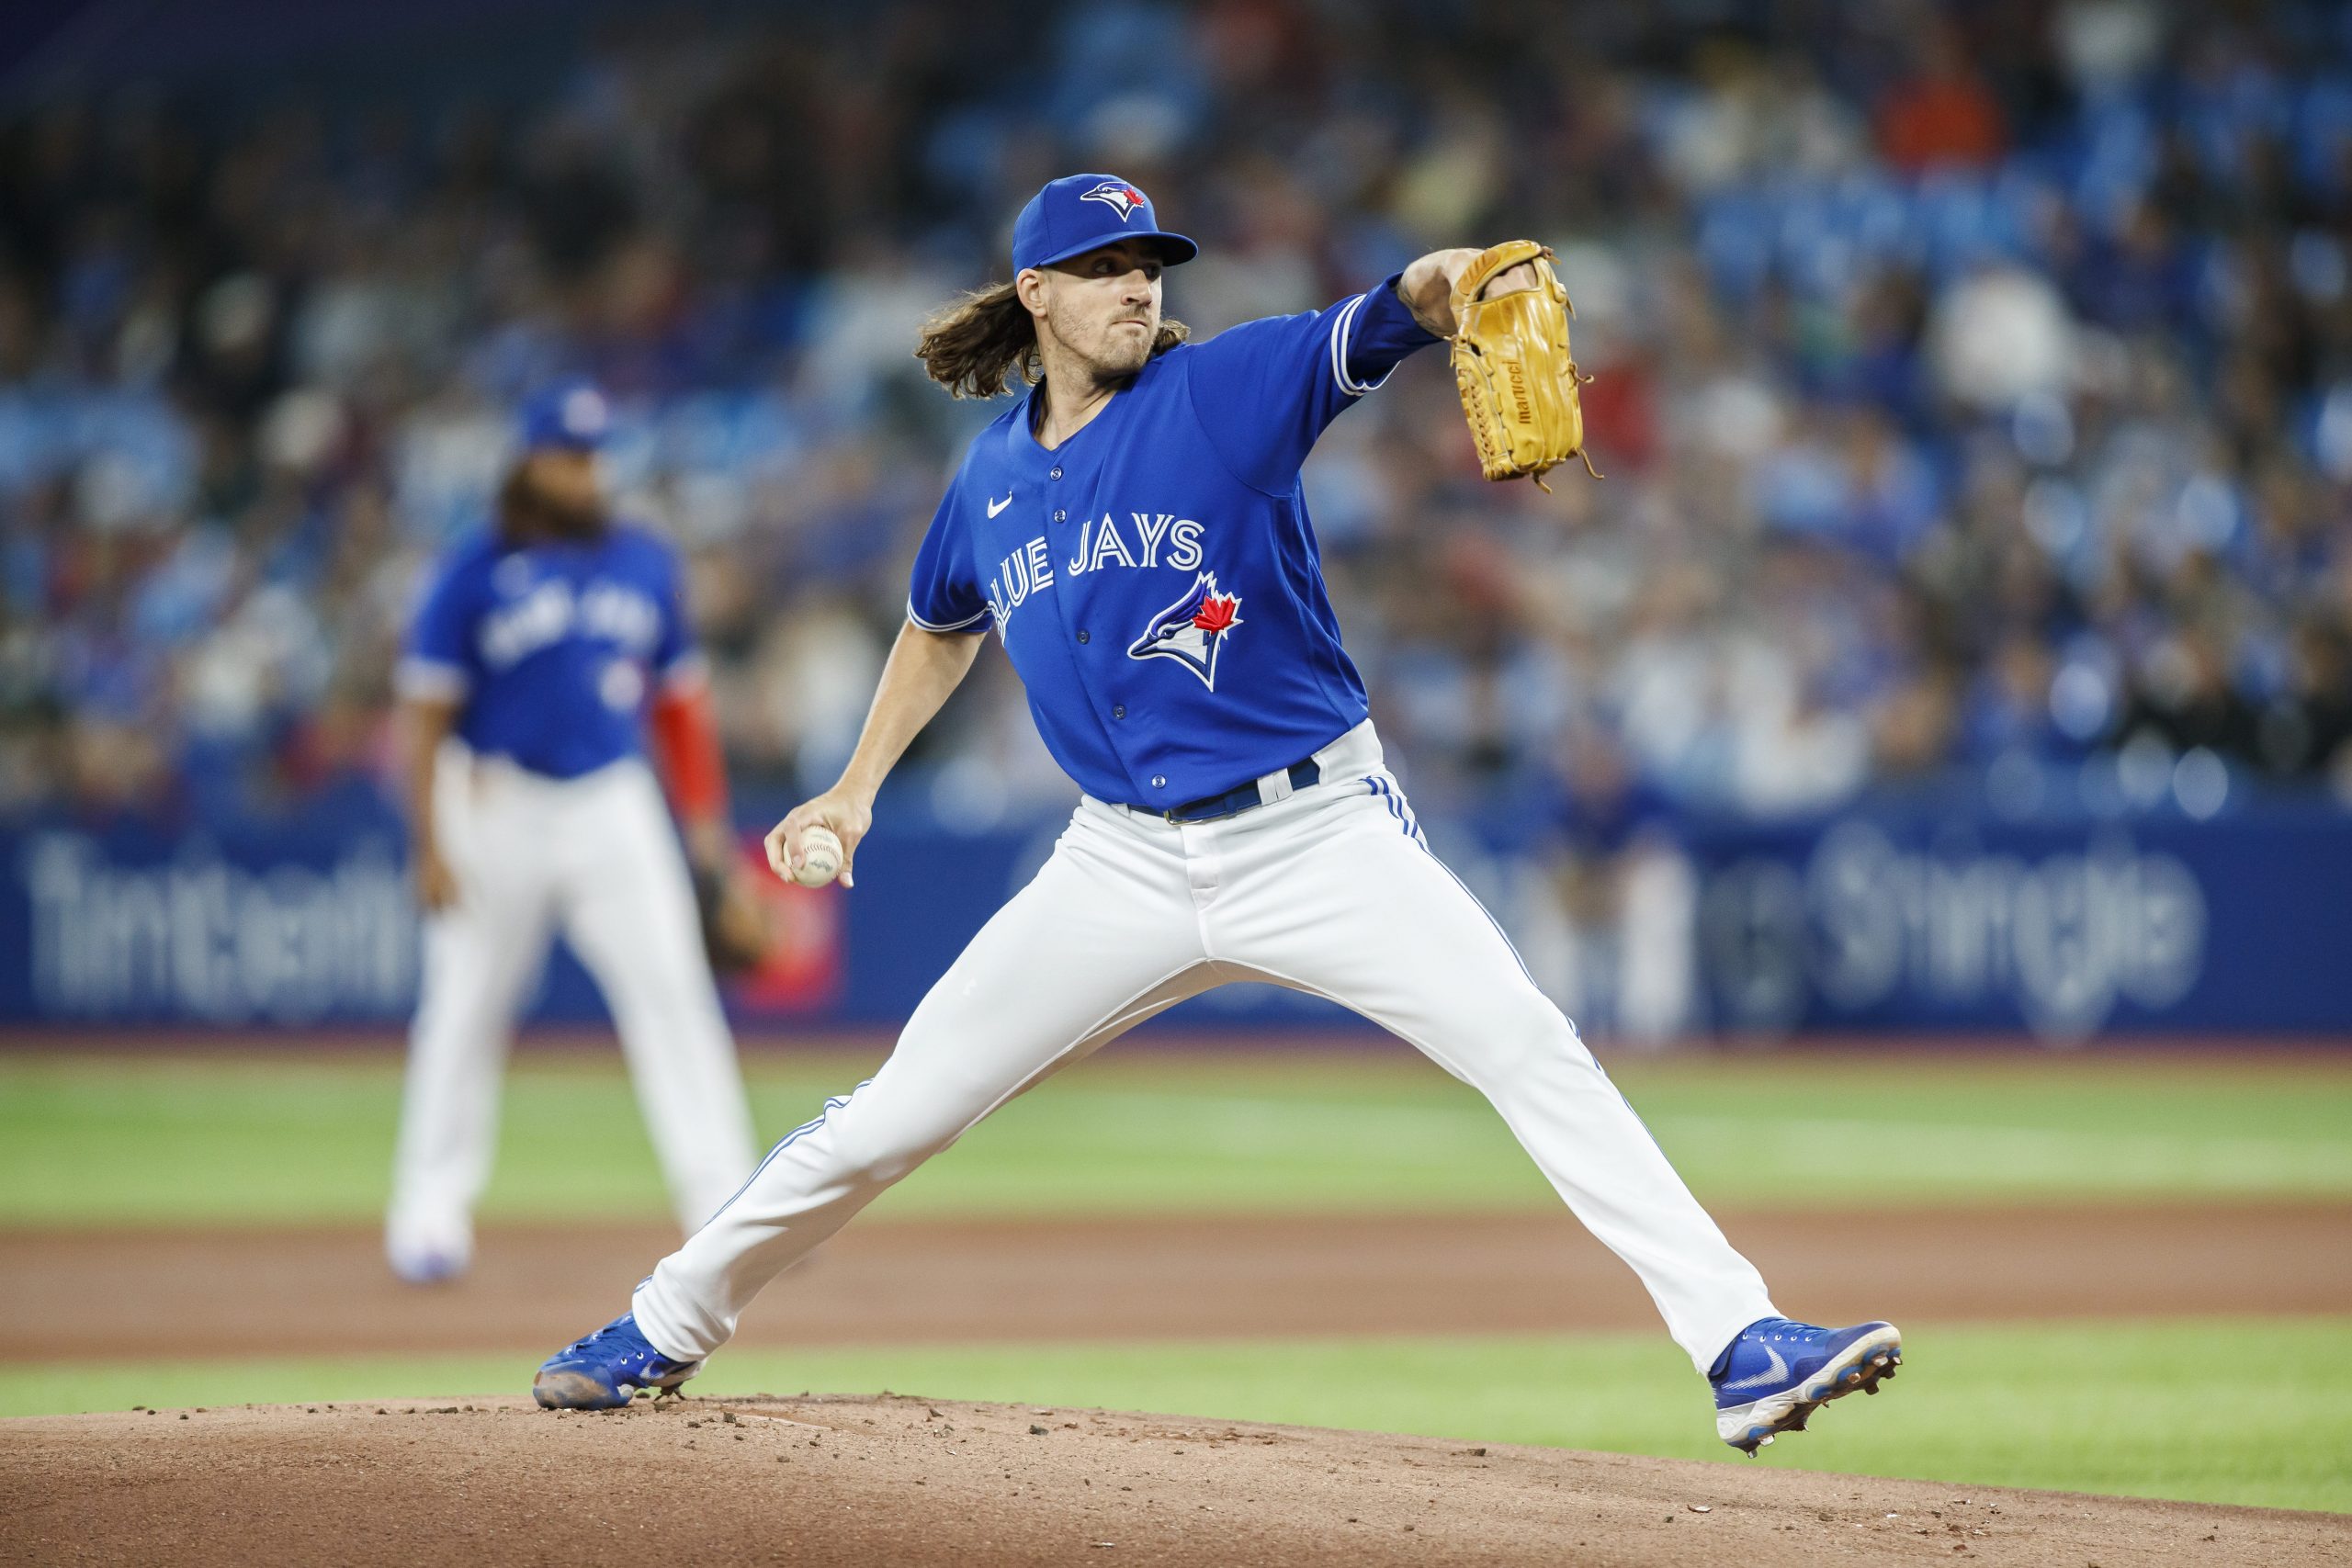 Gausman delivers 1-hit gem as Jays beat Rays 3-1 - Newmarket News